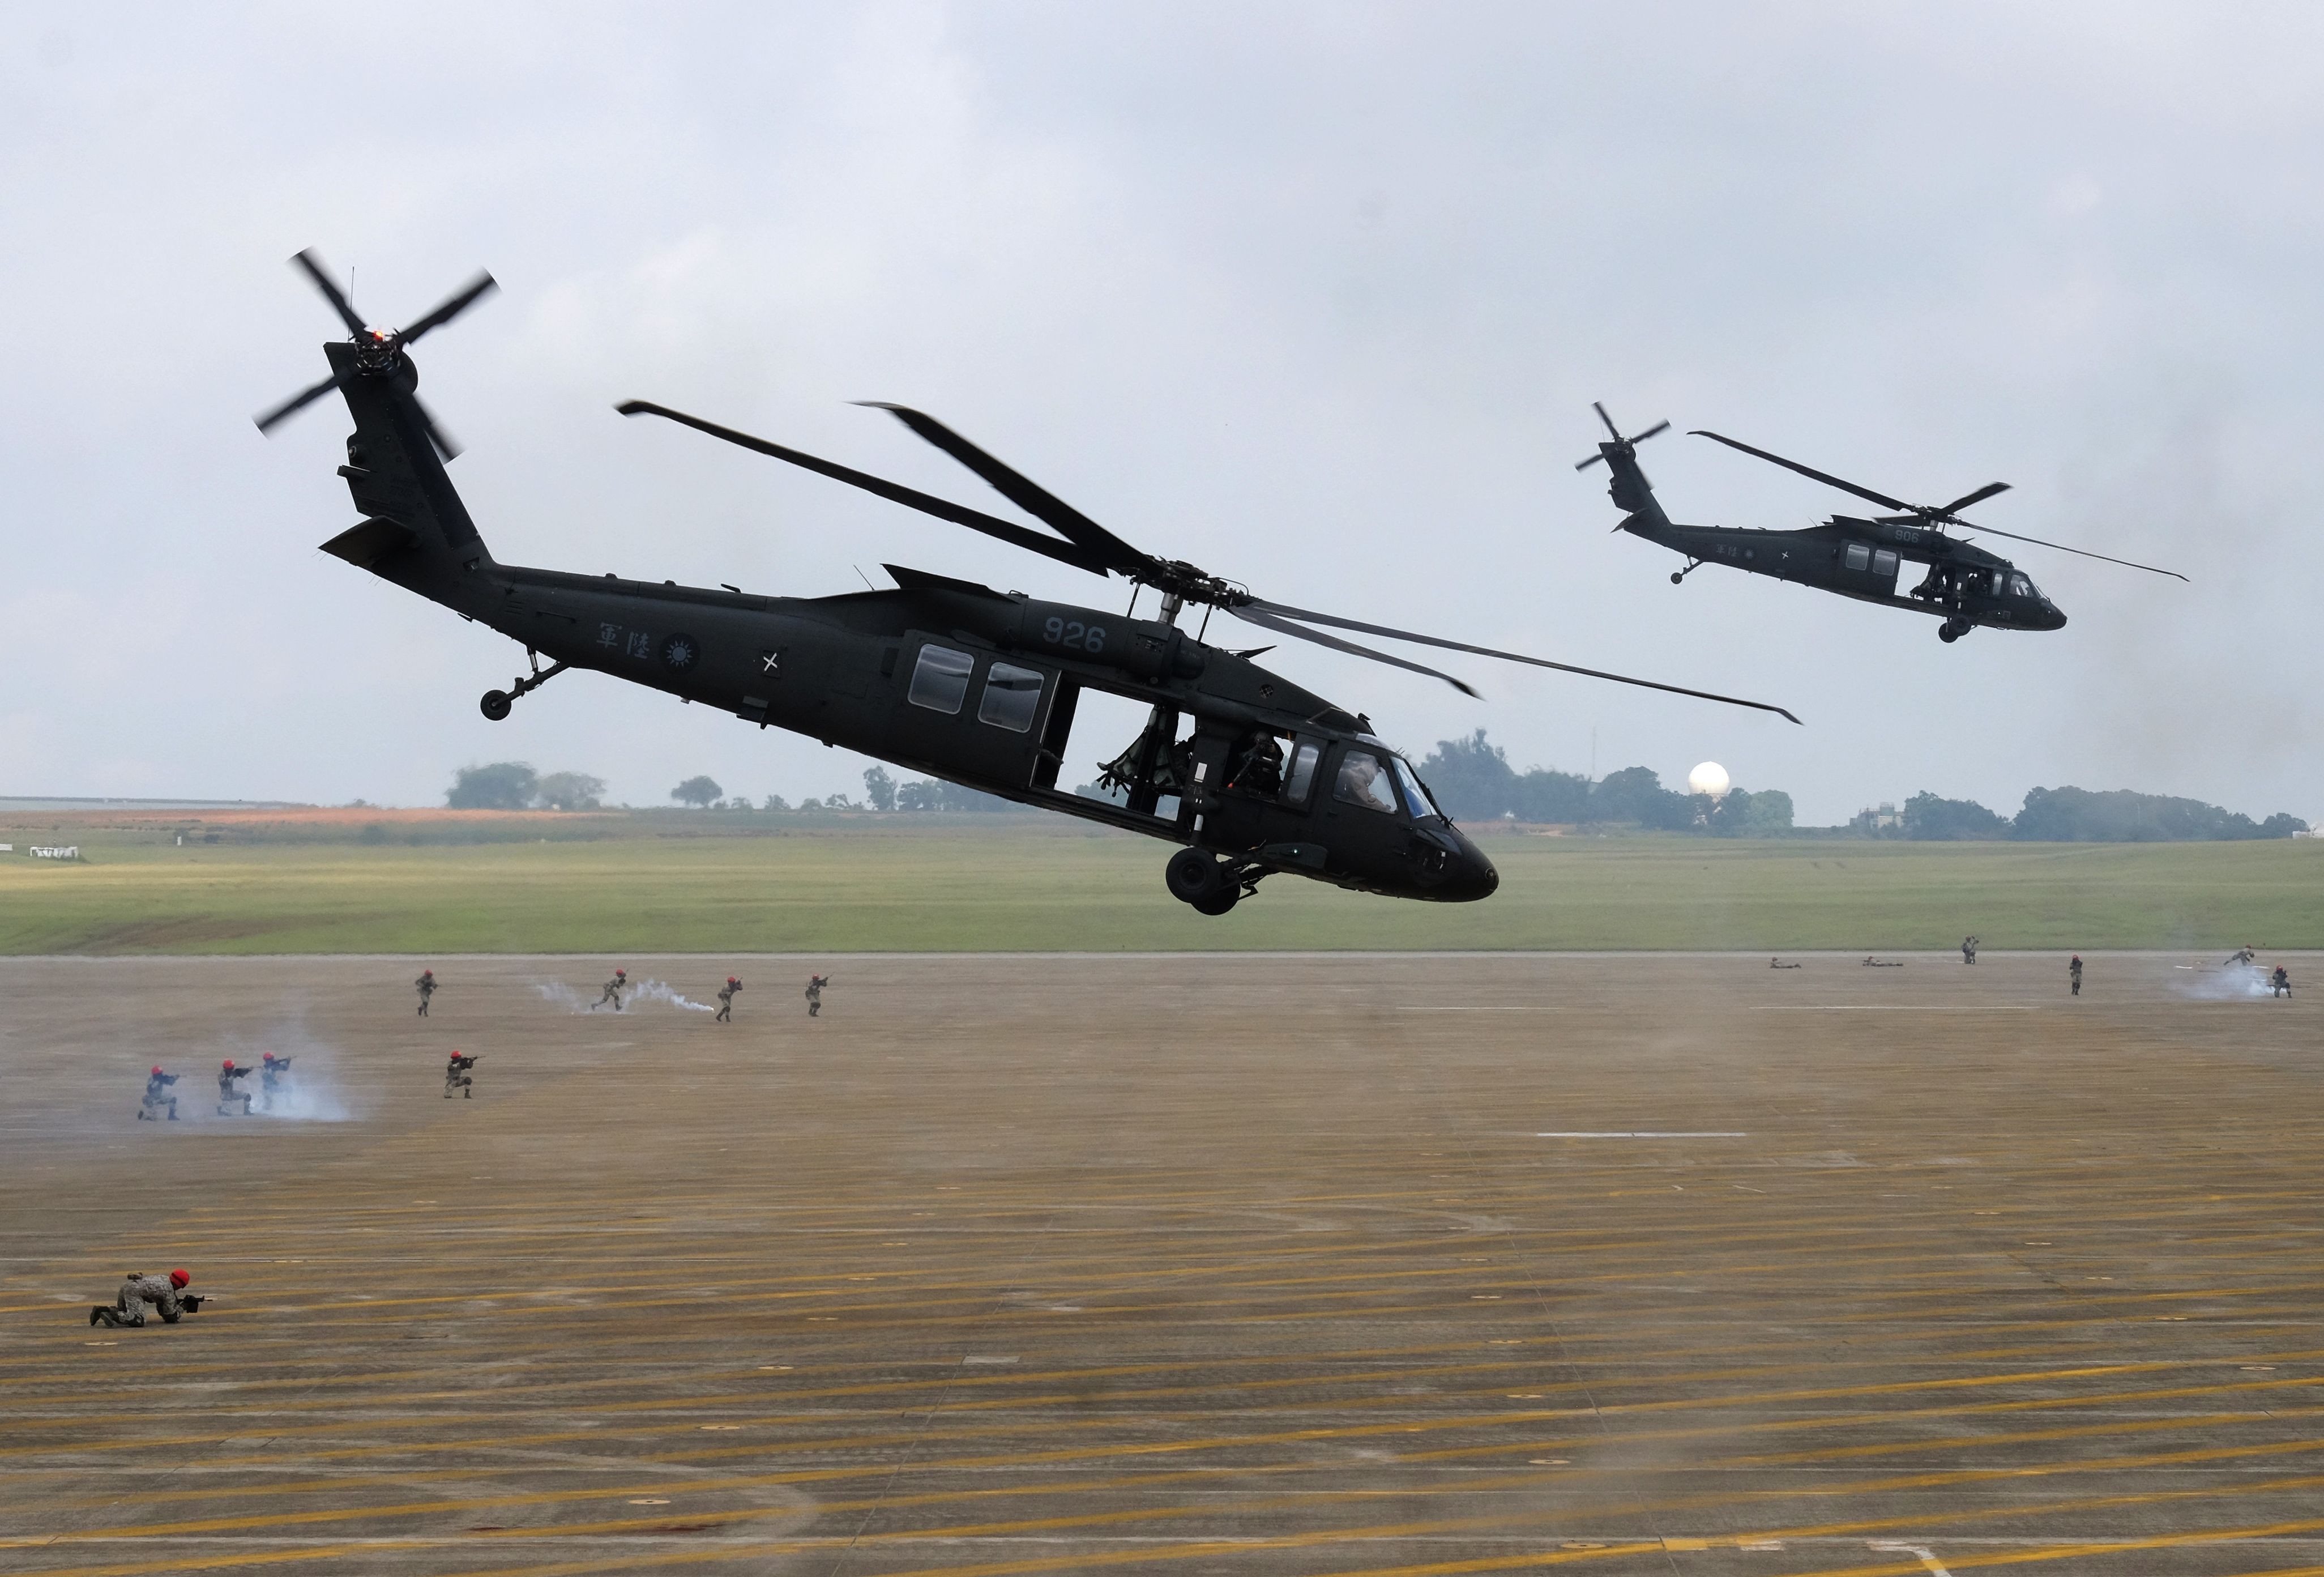 A pair of UH-60 Black Hawk helicopters take part in the Han Kuang military exercise at an air force base in Taichung, central Taiwan, on June 7. The annual drills simulating Chinese attacks are the largest since they were first held in 1984 and are a response to Beijing stepping up military and diplomatic pressure on the island amid growing tensions. Photo: AFP